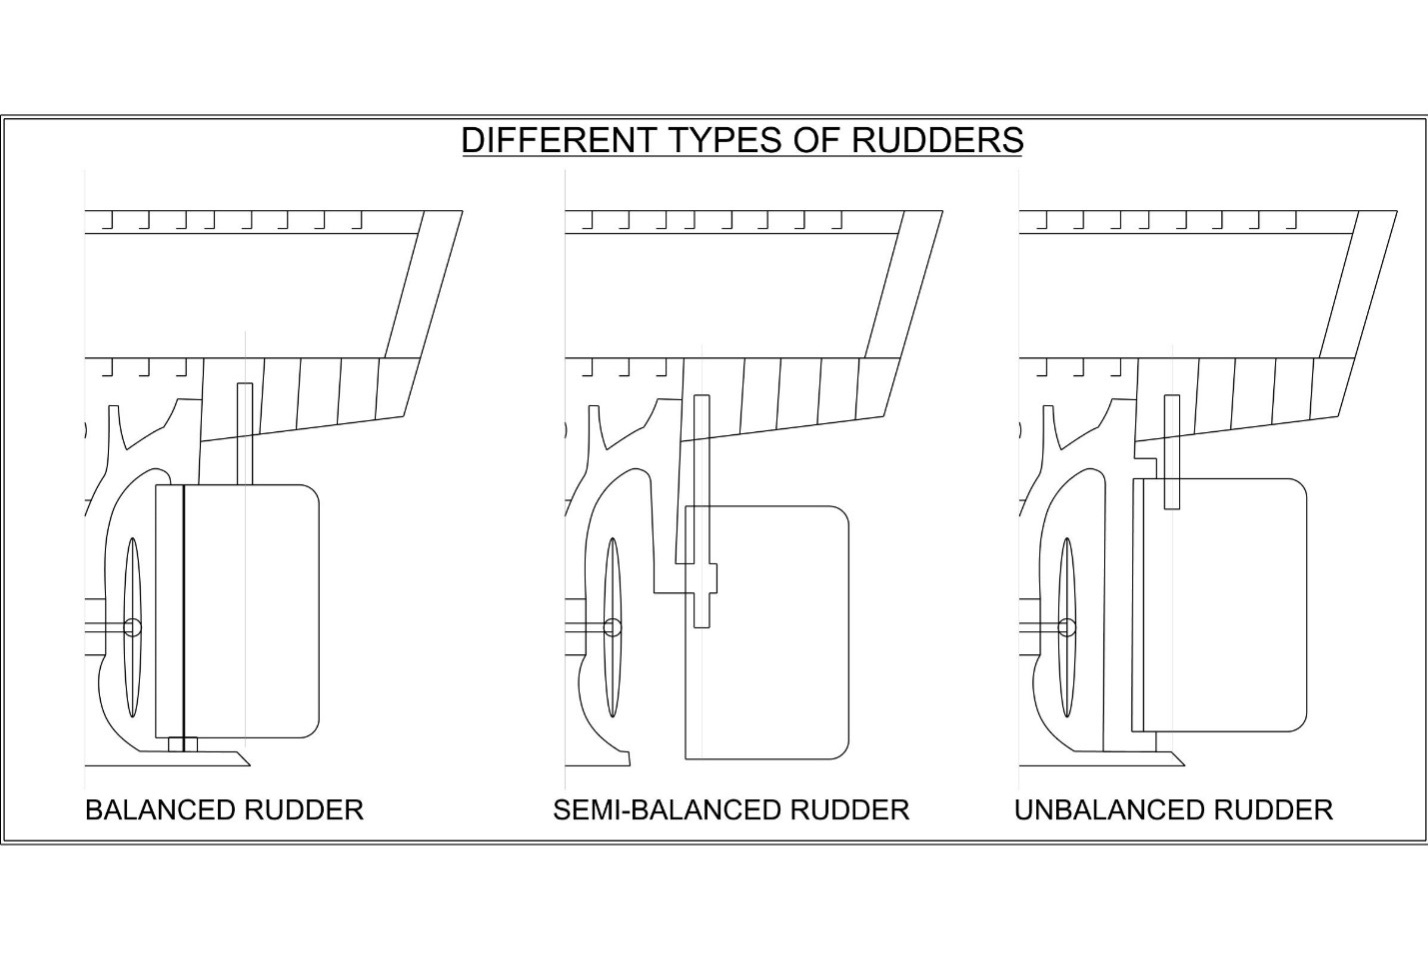 How Does A Ship Rudder Function On A Vessel?